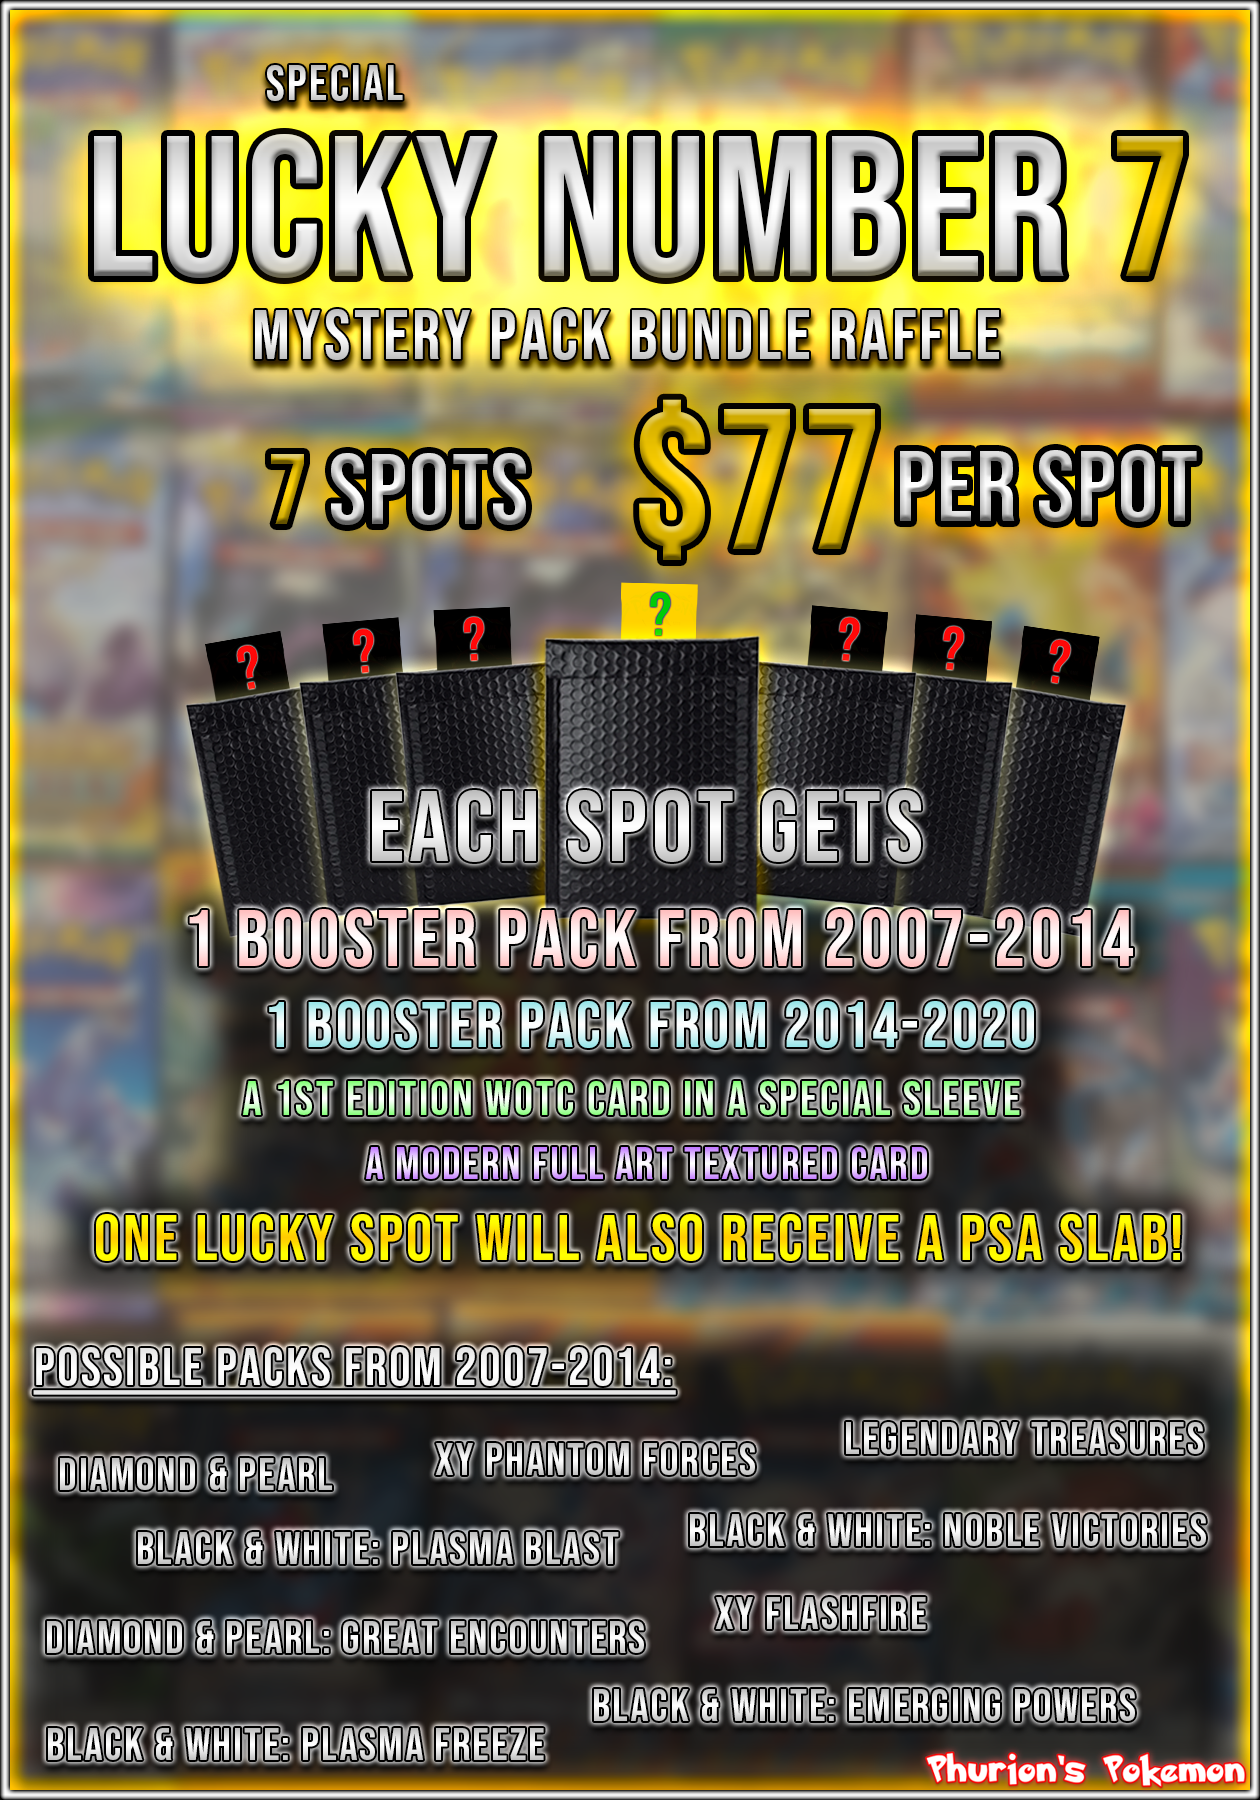 ** LUCKY NUMBER 7 MYSTERY PACK BUNDLE **